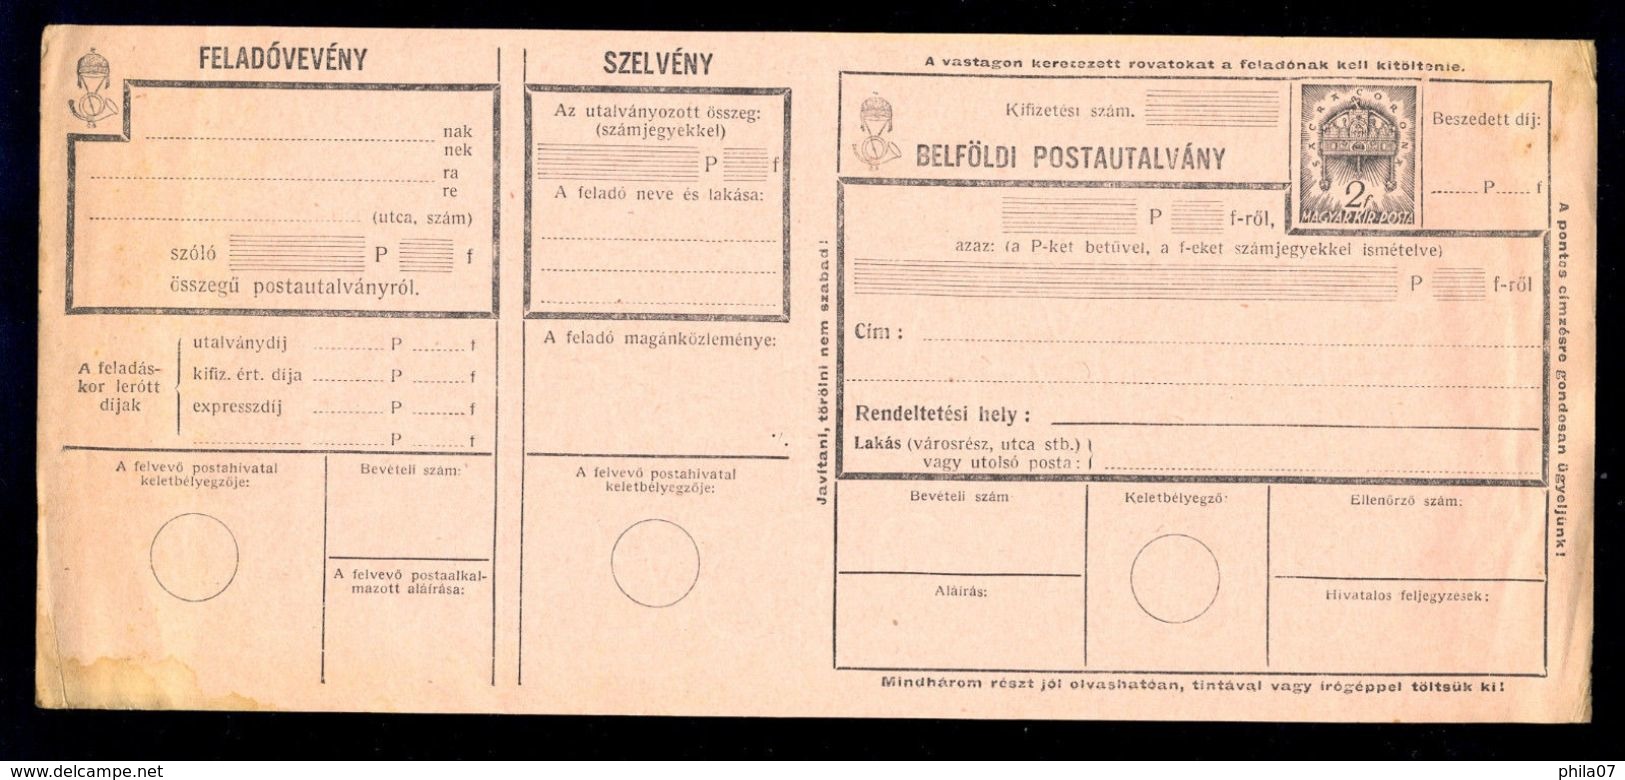 Hungary - lot of various old postal forms and printed matters. Rarely seen / 9 scans